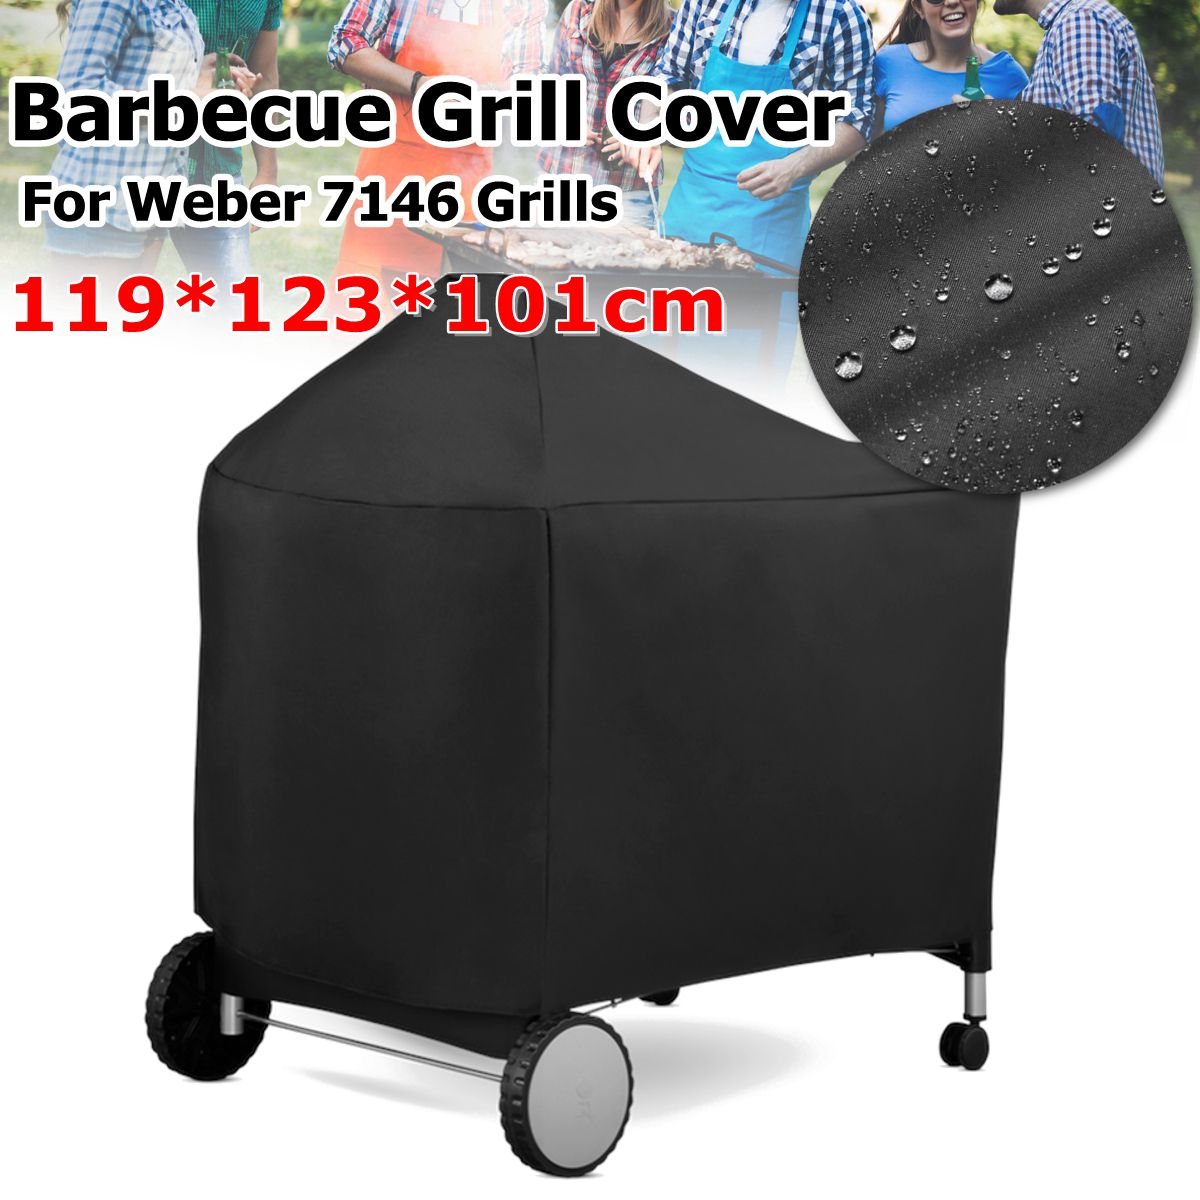 Waterproof-Barbecue-Grill-Cover-for-Weber-7146-Performer-Premium-and-Deluxe-1576280-1